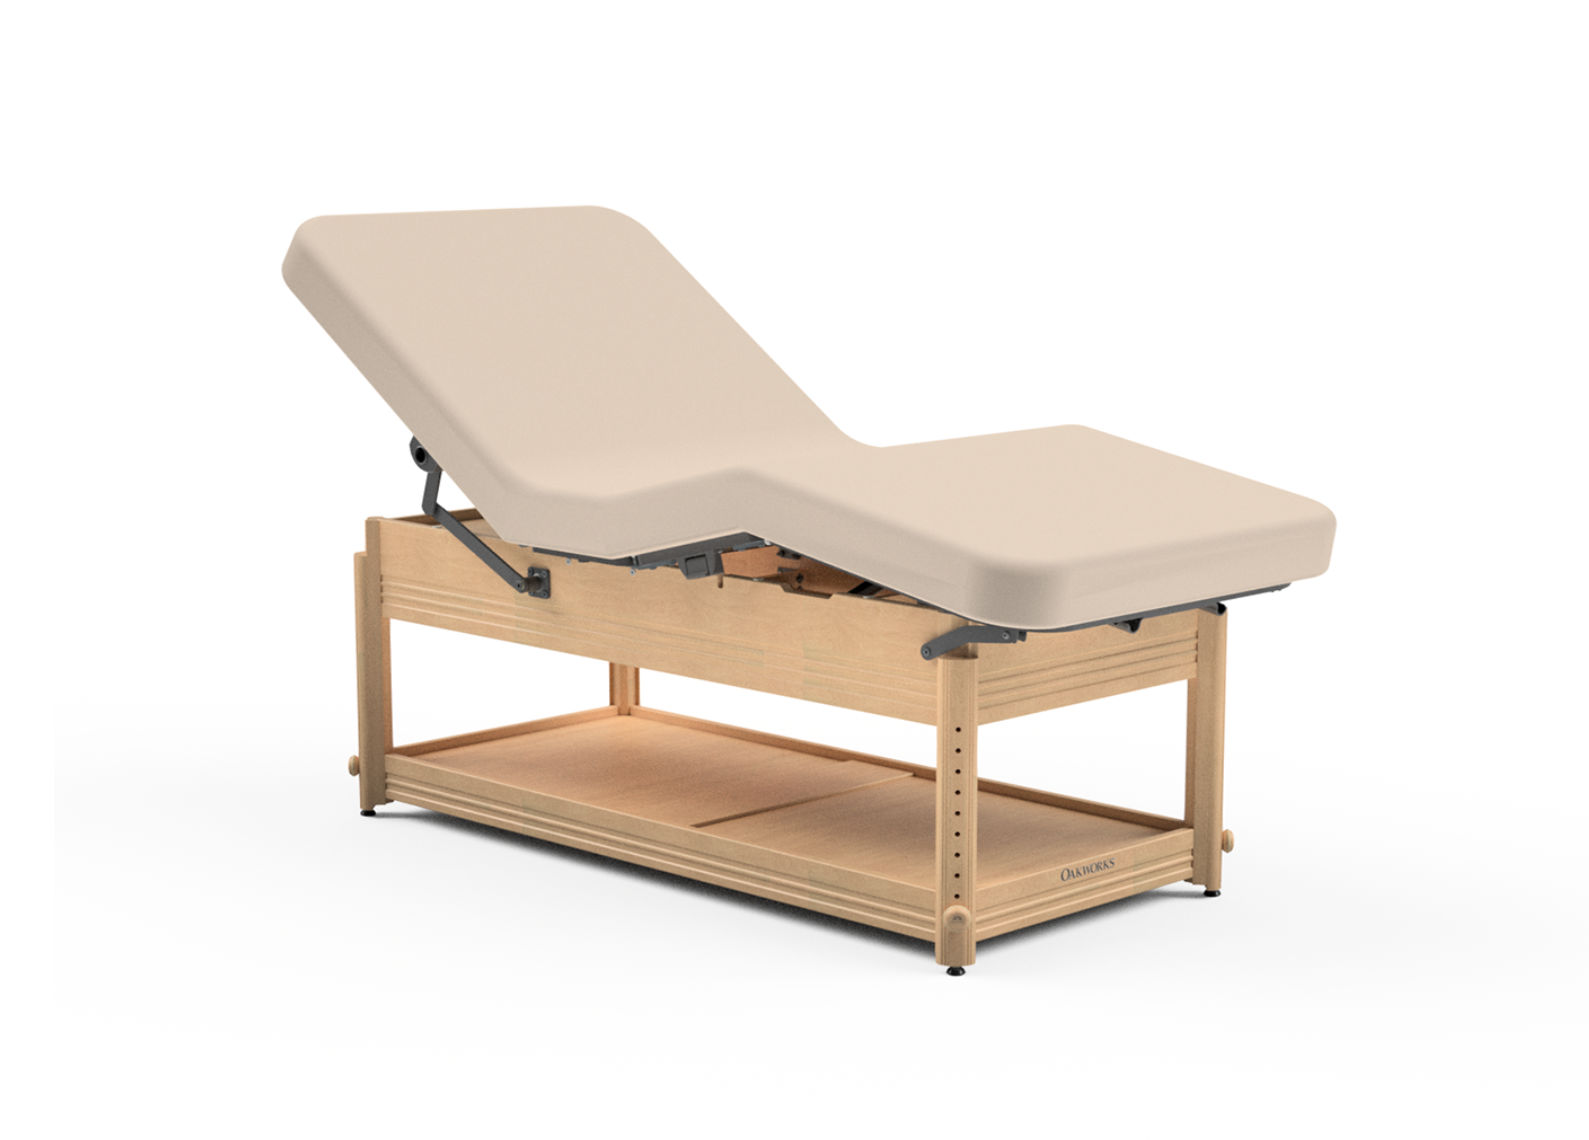 Spavision | Clinician Adjustable with Lift-Assist Salon Top